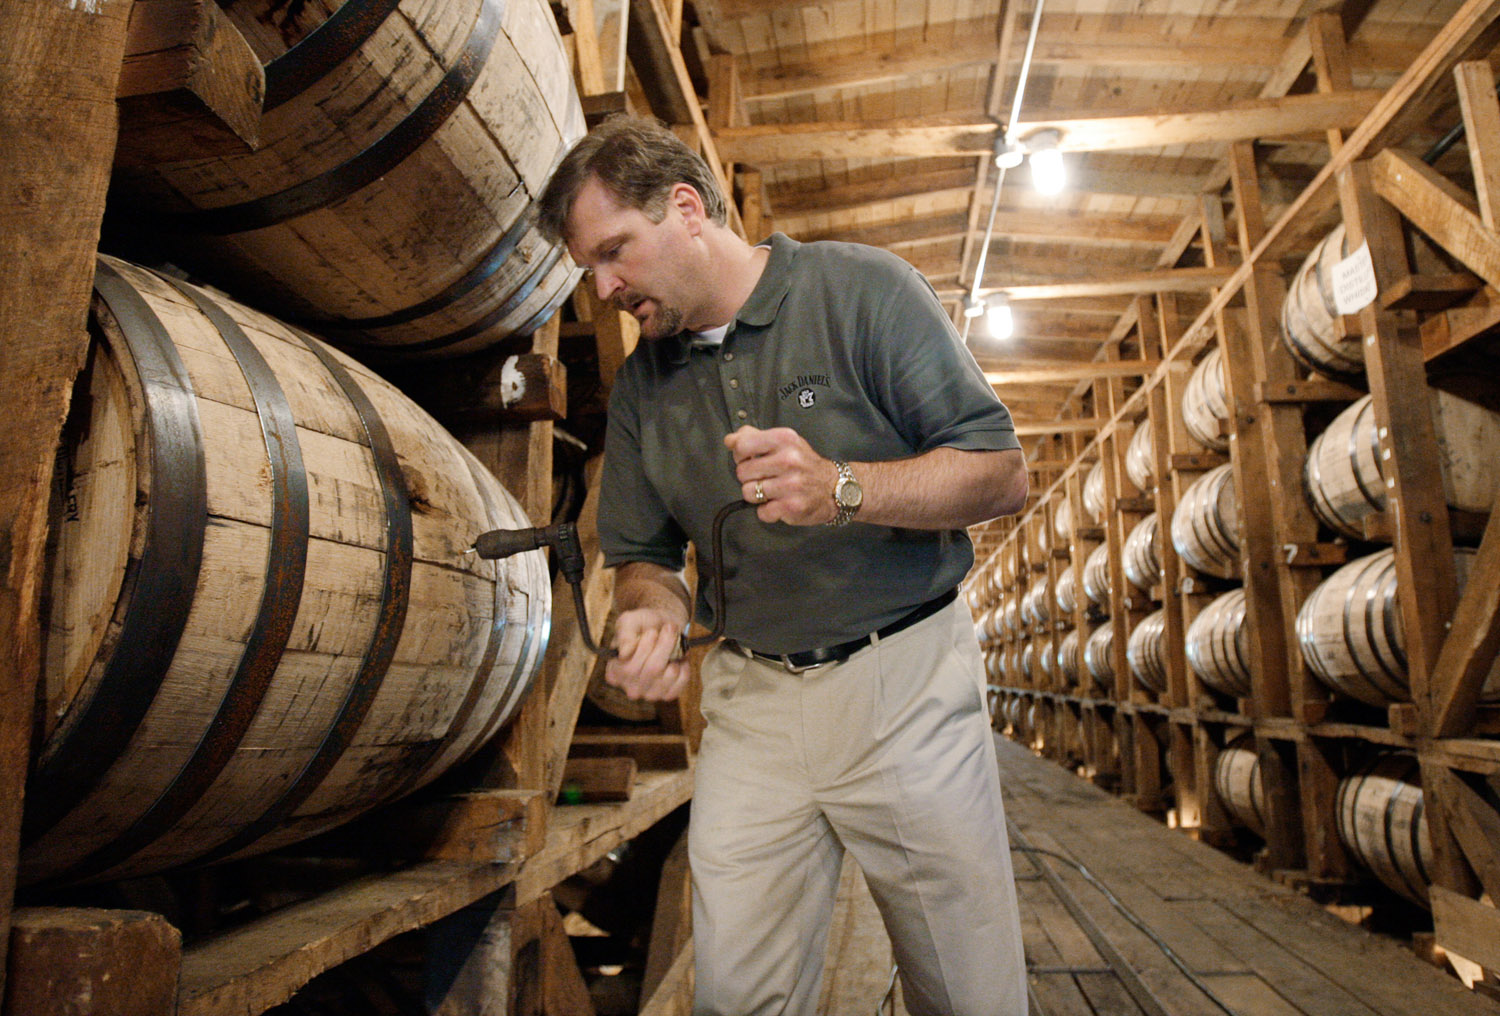 Jeff Arnett, the master distiller at the Jack Daniel Distillery in Lynchburg, Tenn., drills a hole in a barrel of whiskey in one of the aging houses at the distillery, May 20, 2009. (Mark Humphrey—AP)